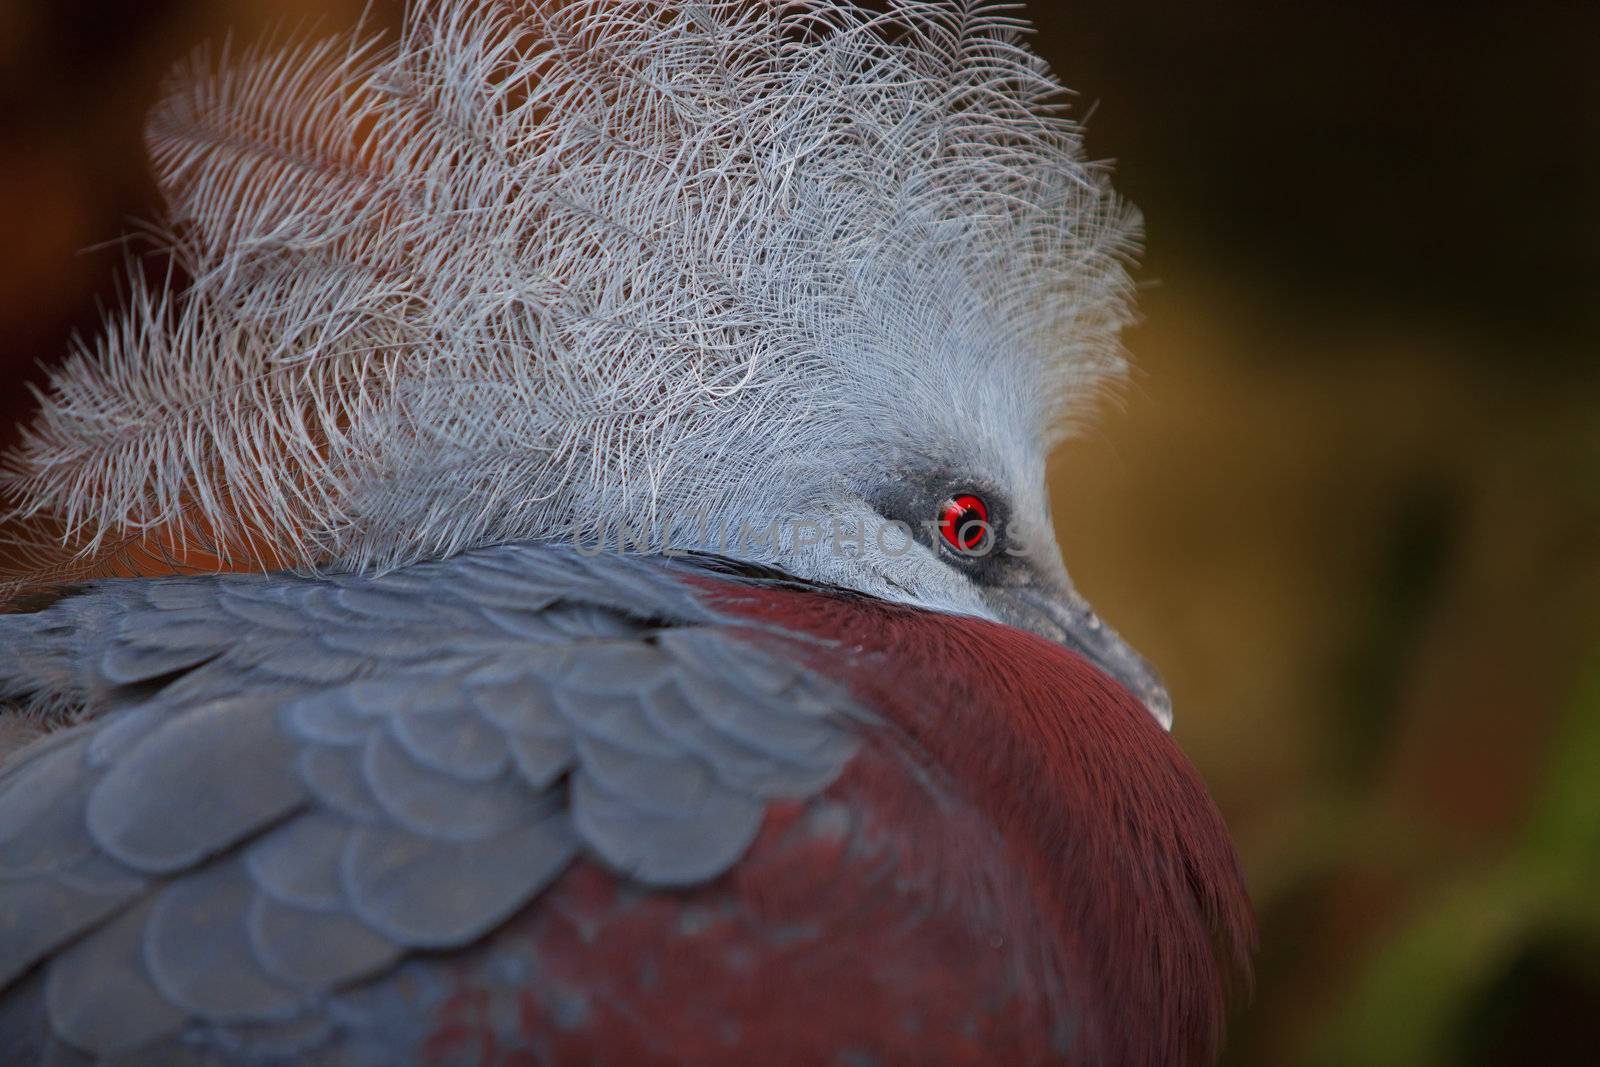 Southern Crowned Pigeon in the wild, Indonesia